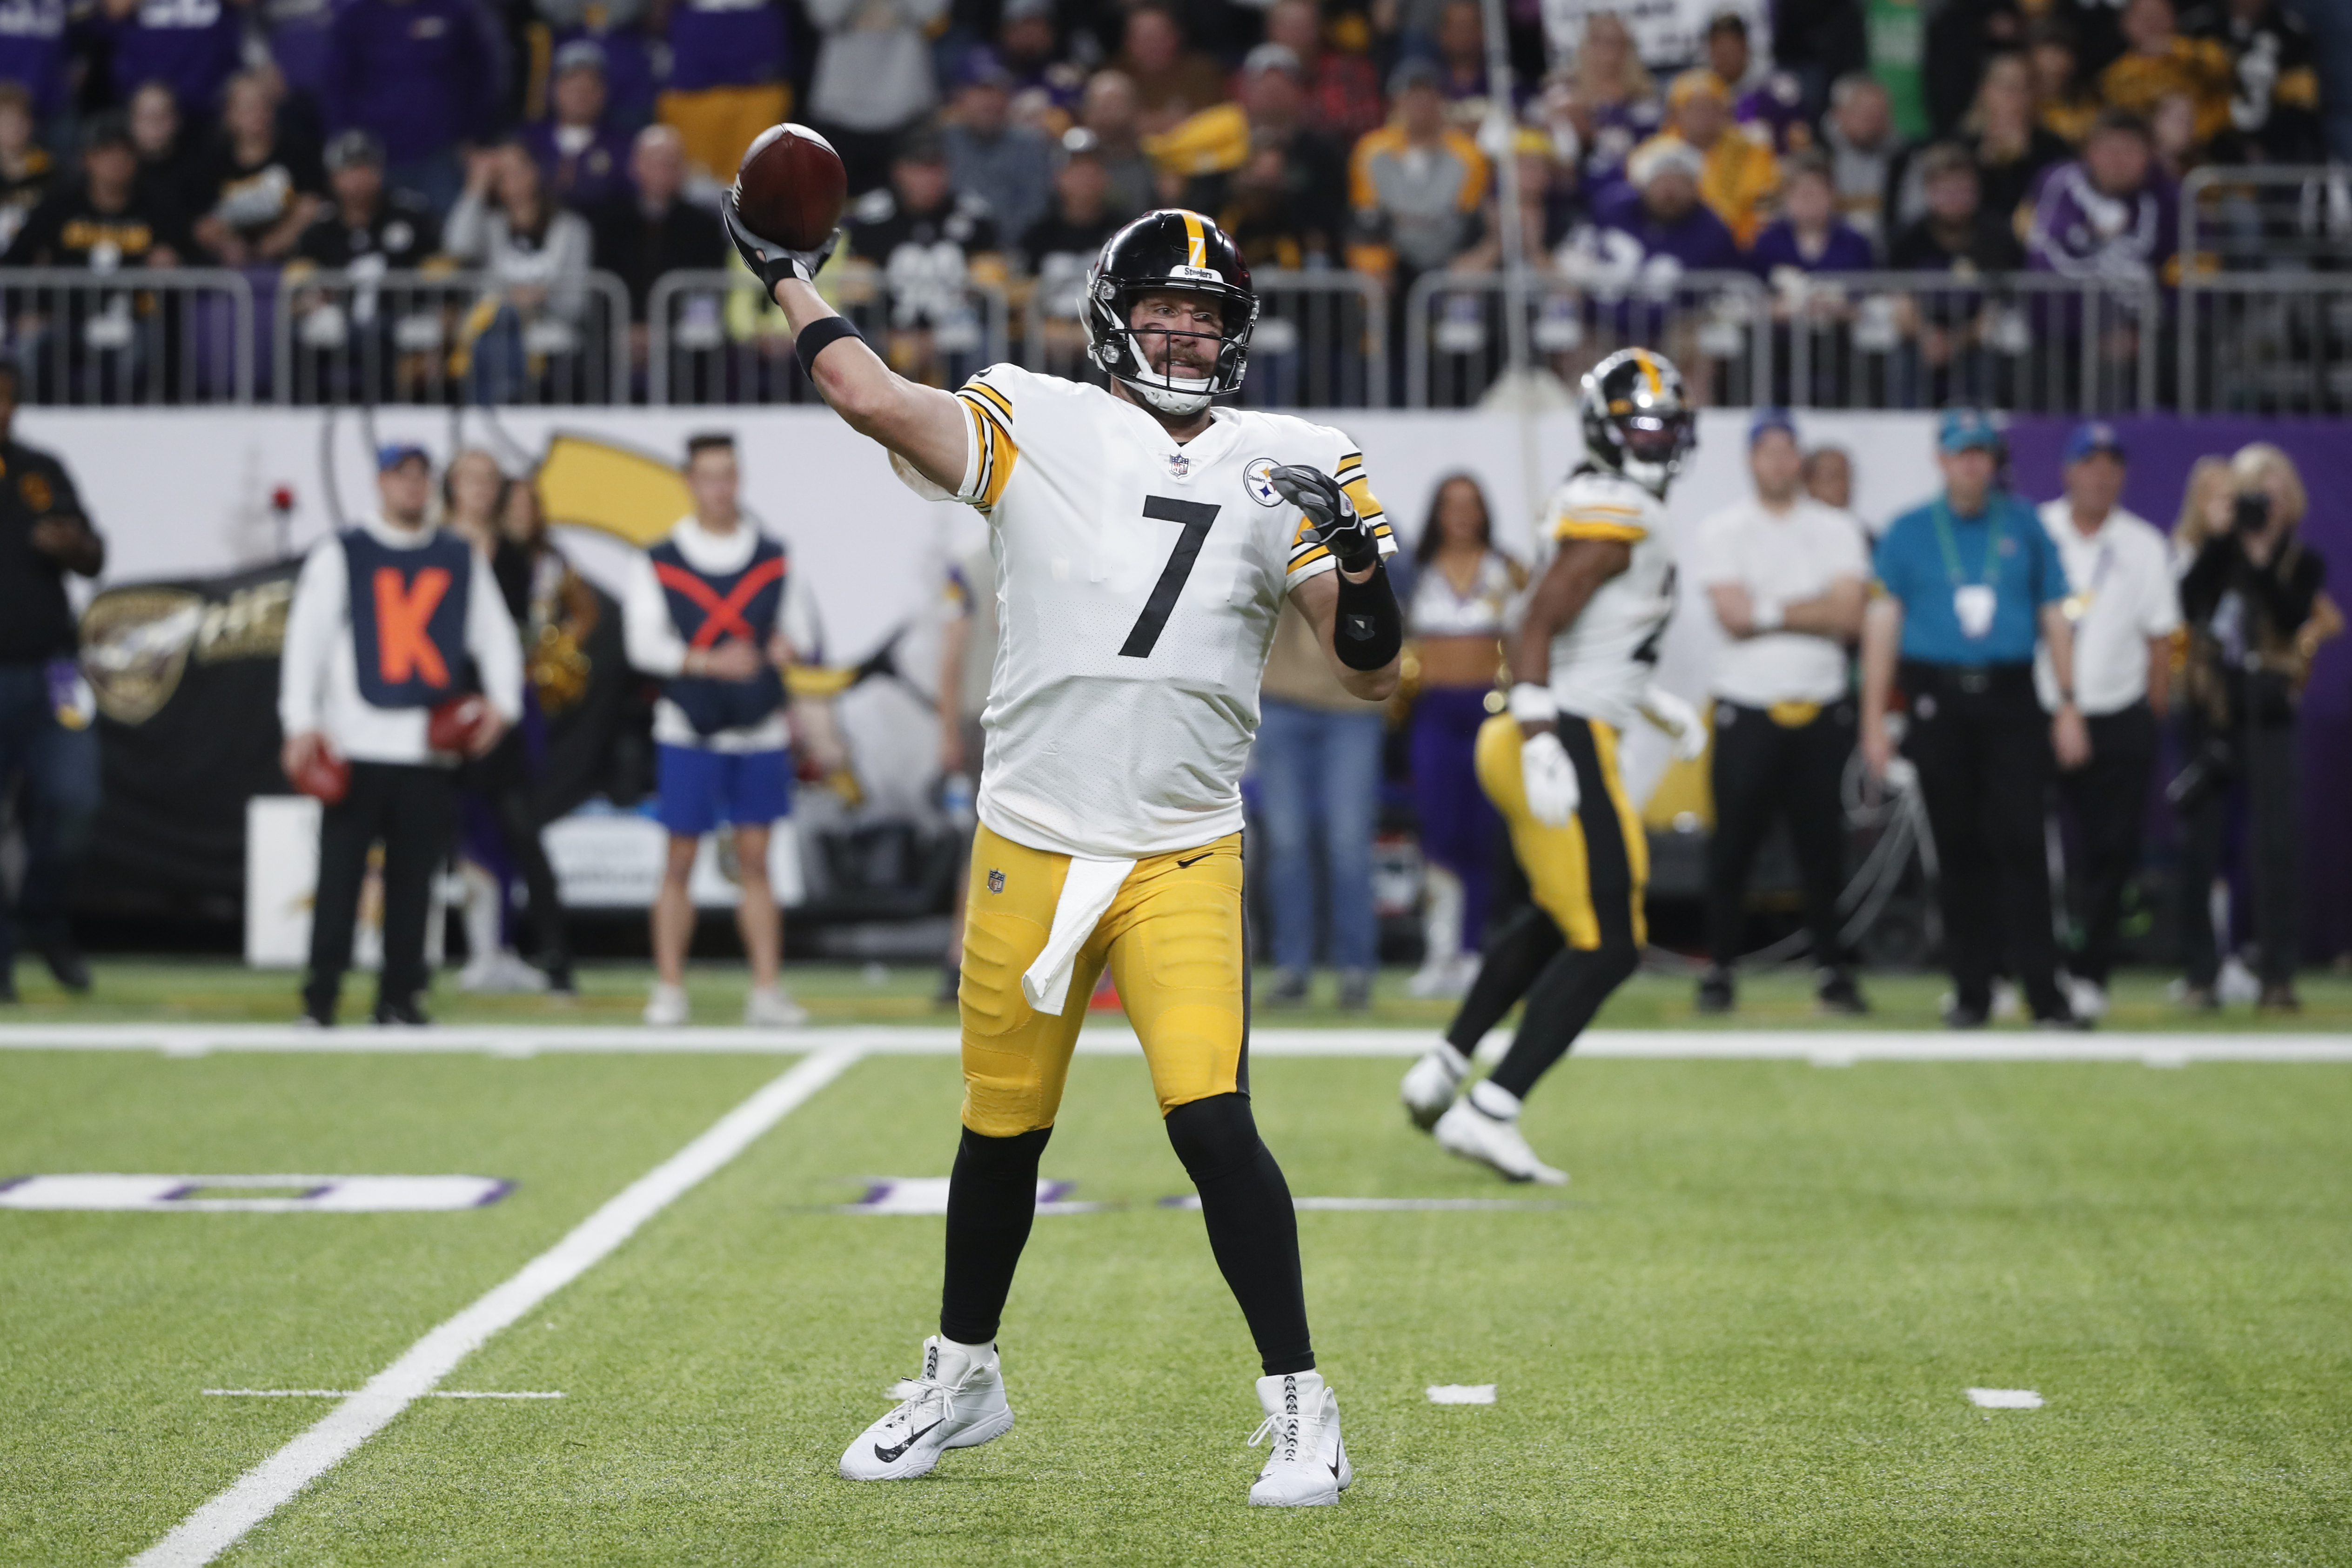 Ben Roethlisberger should end up in the Hall of Fame, but his